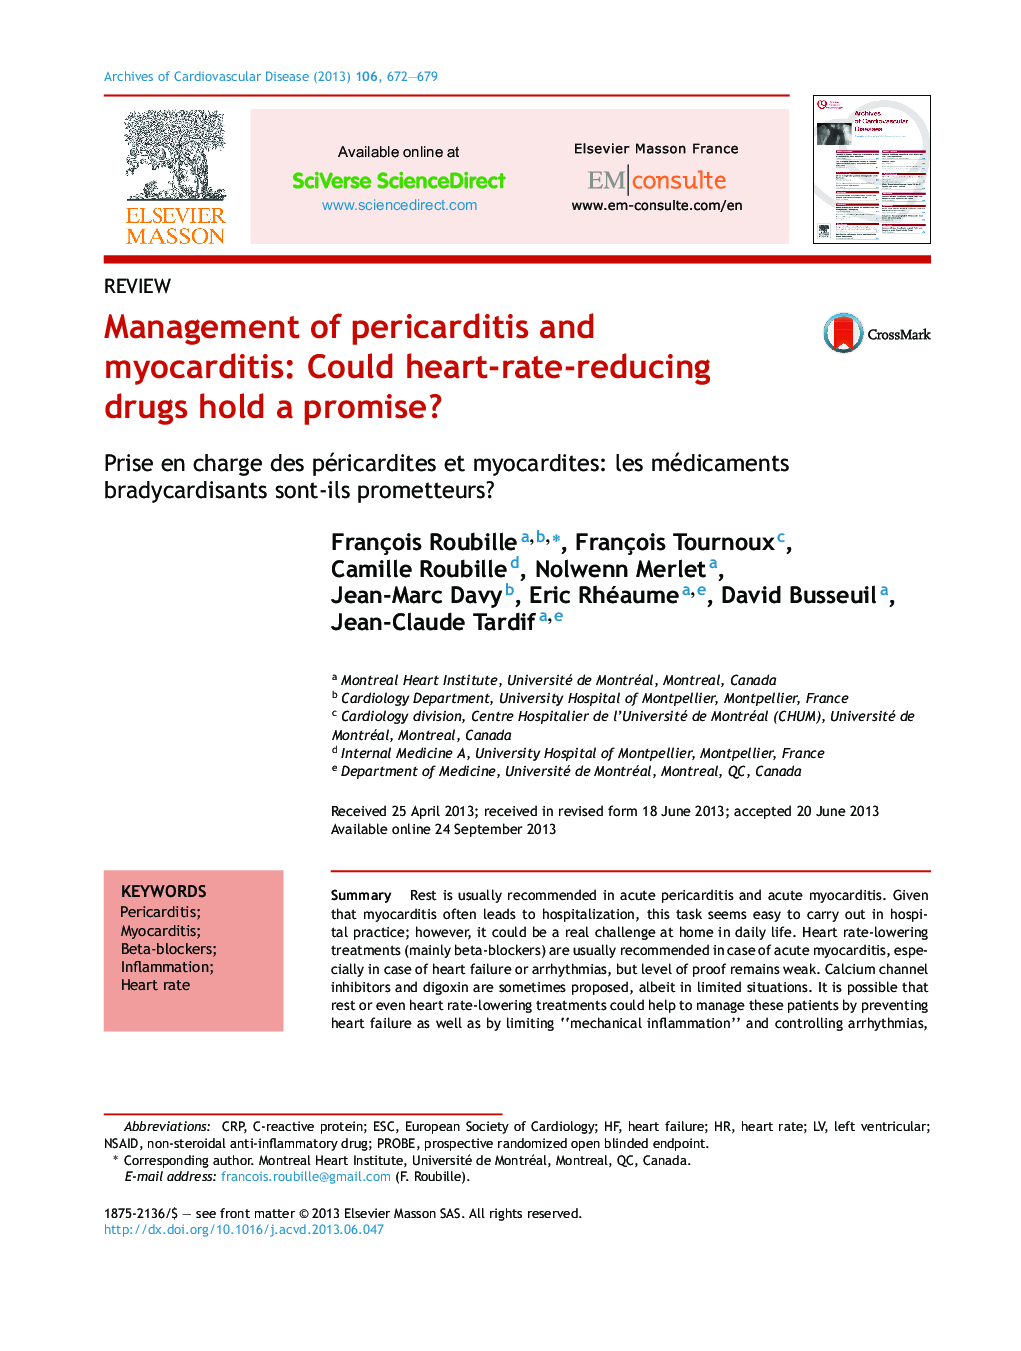 Management of pericarditis and myocarditis: Could heart-rate-reducing drugs hold a promise?